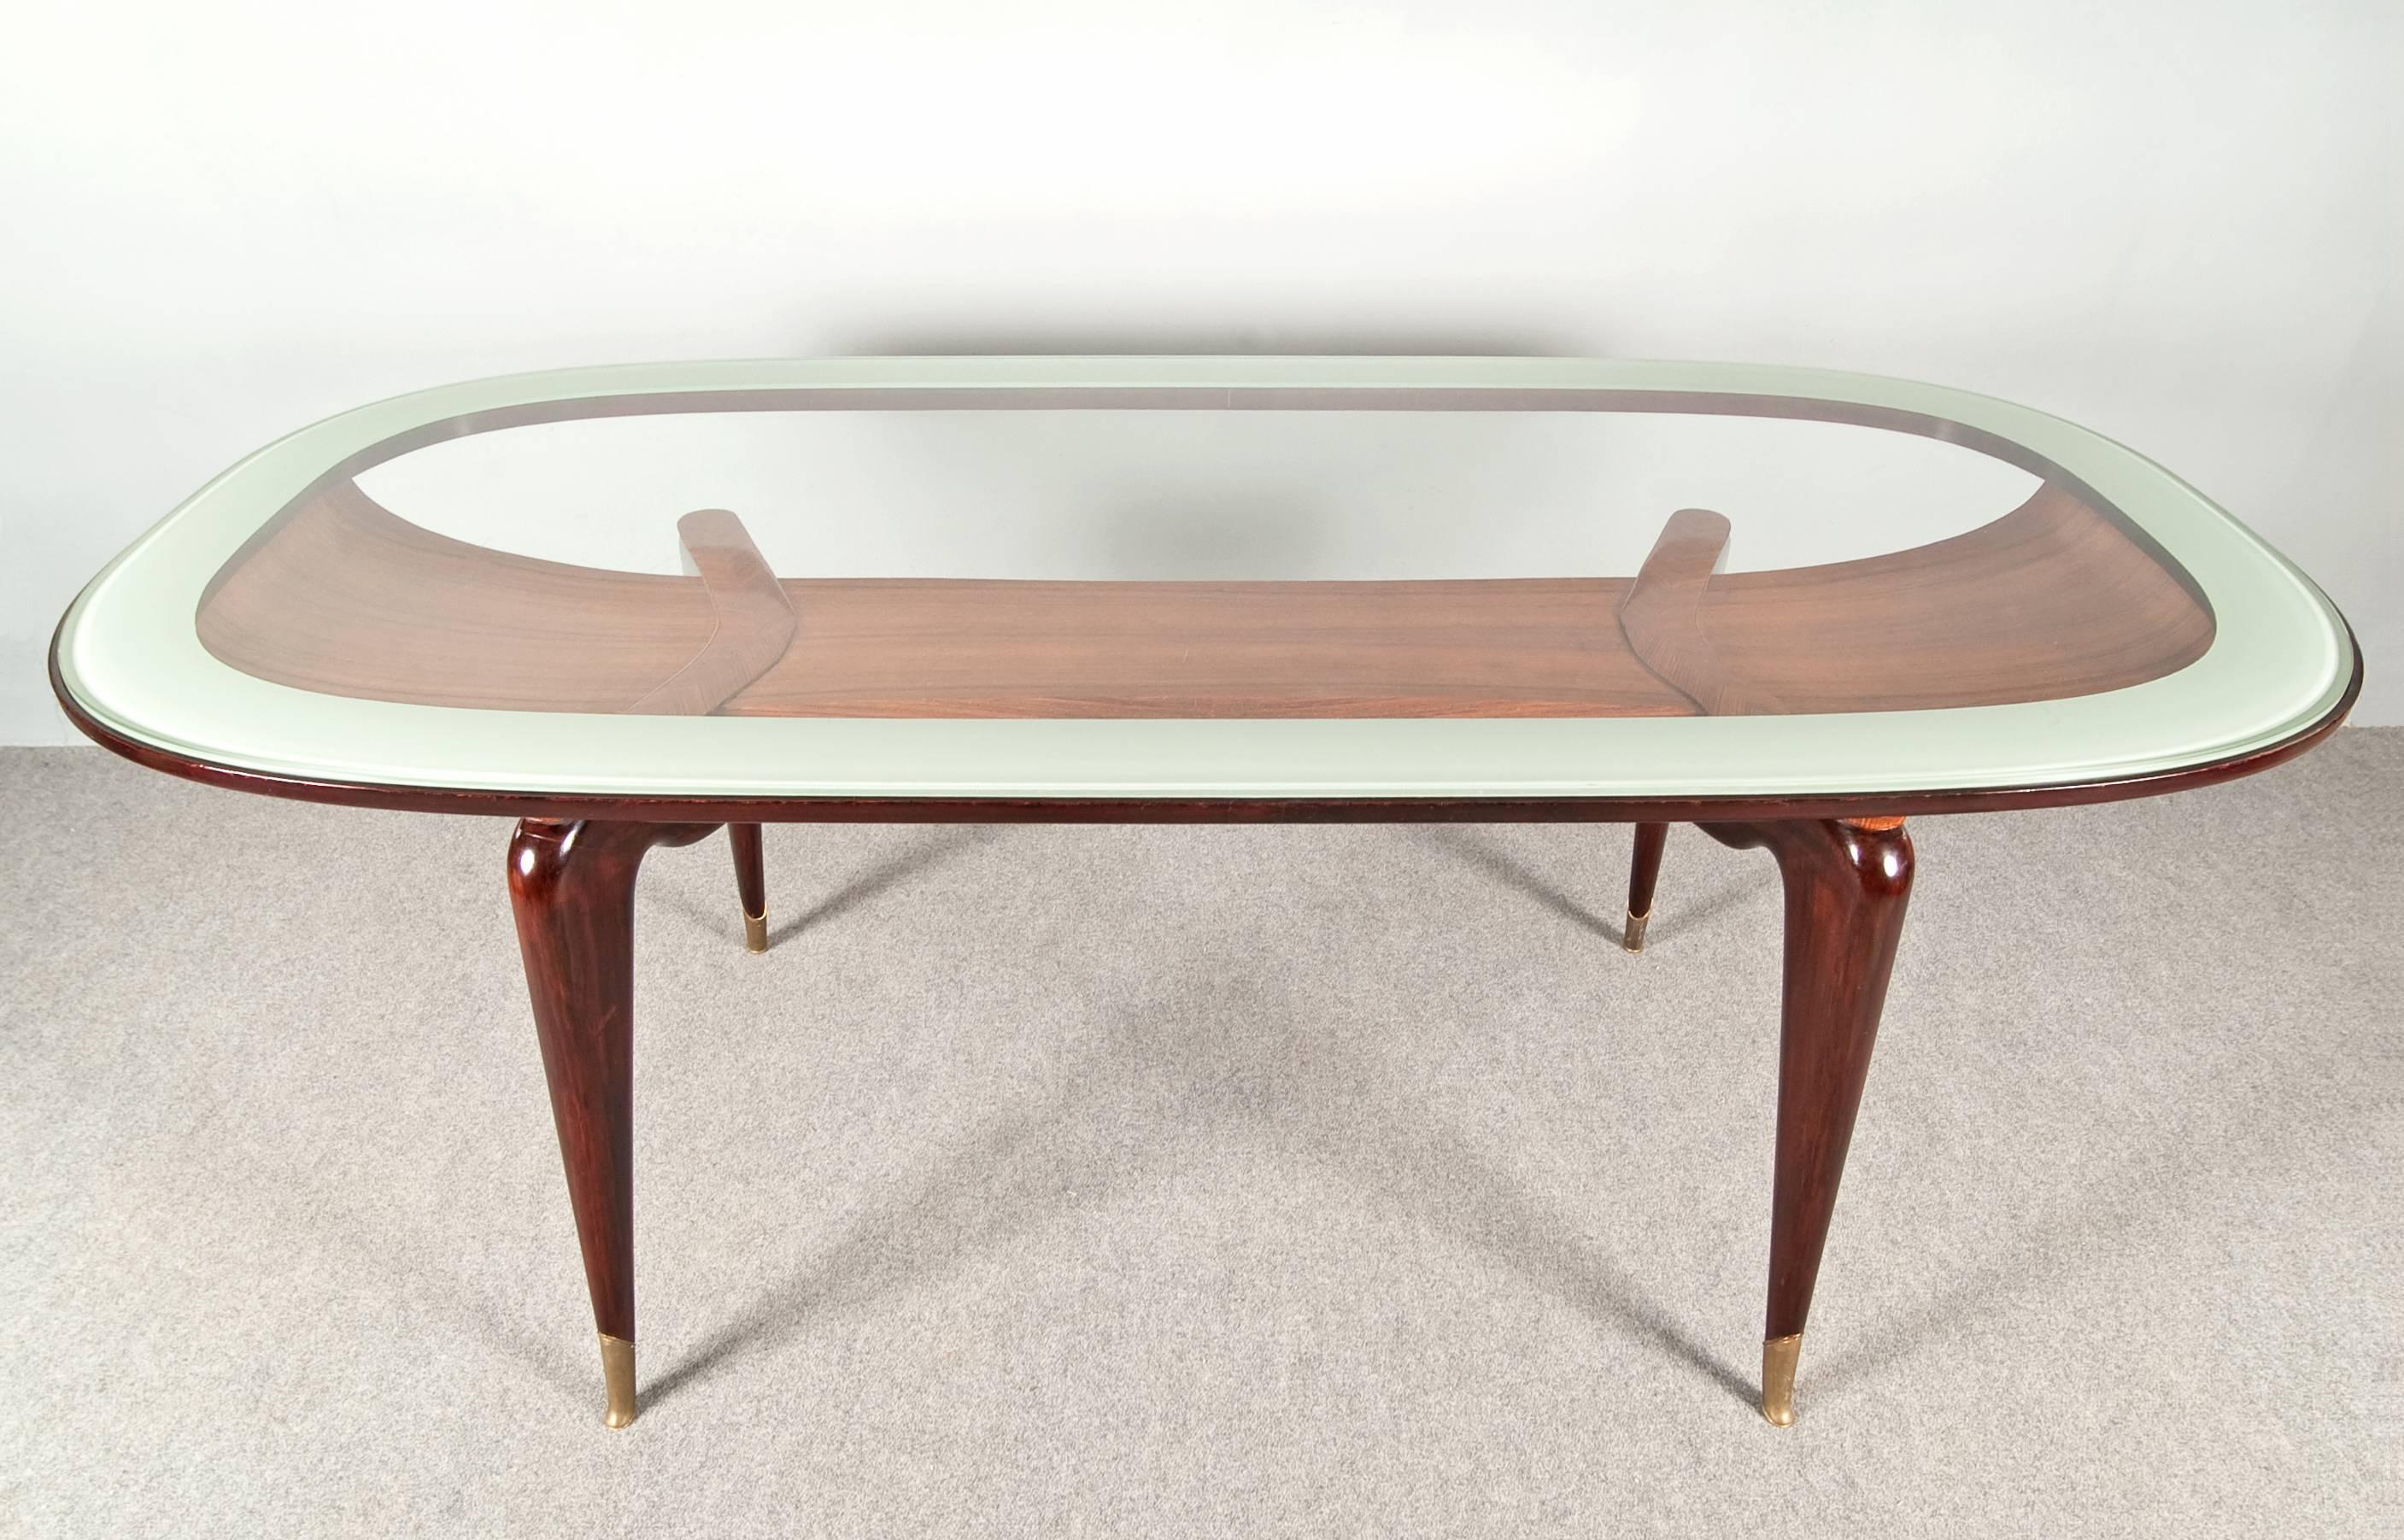 Really wonderful table attributed to Ico Parisi.
Elegant shape, under the glass top you can see an extraordinary ebanist work.
Brass details.